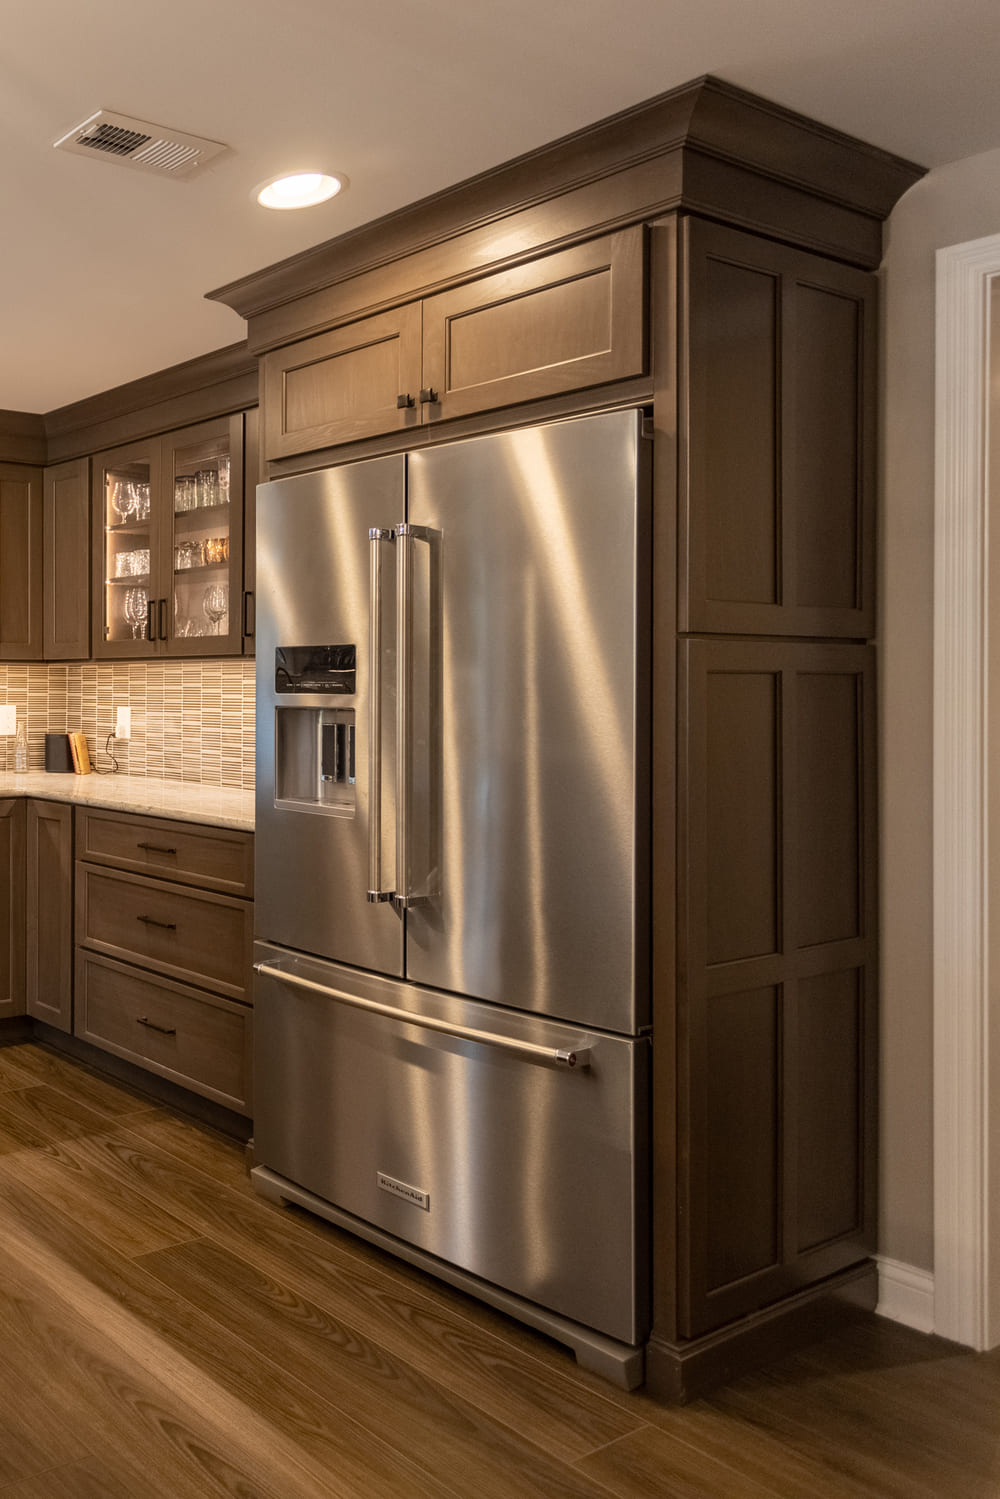 Stainless steel fridge with above cabinet storage in Ross County basement remodel